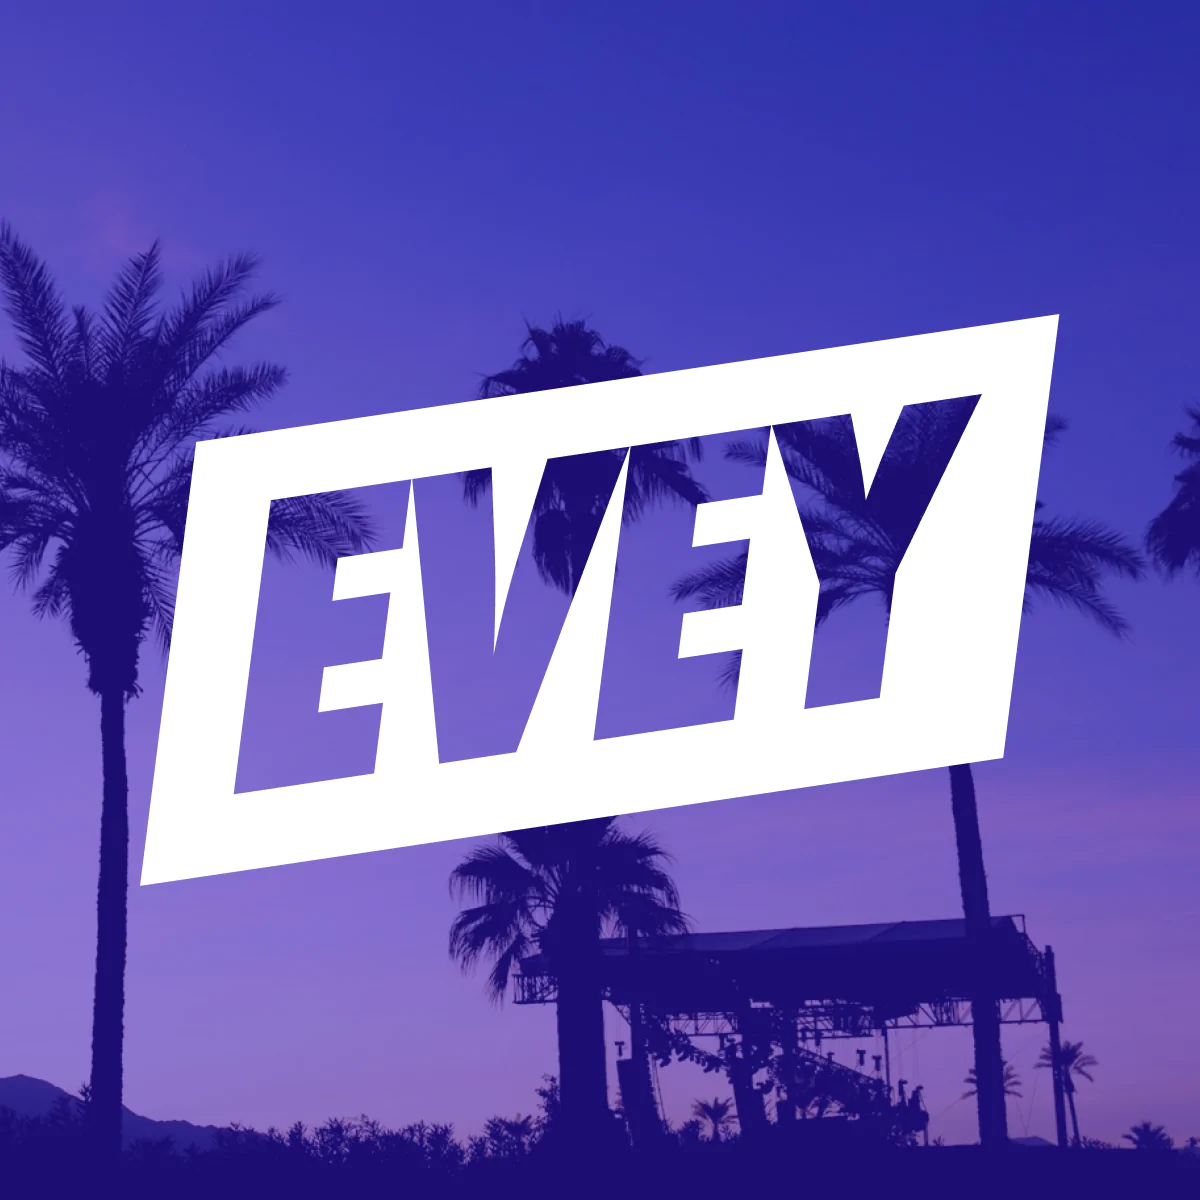 Evey Events & Tickets